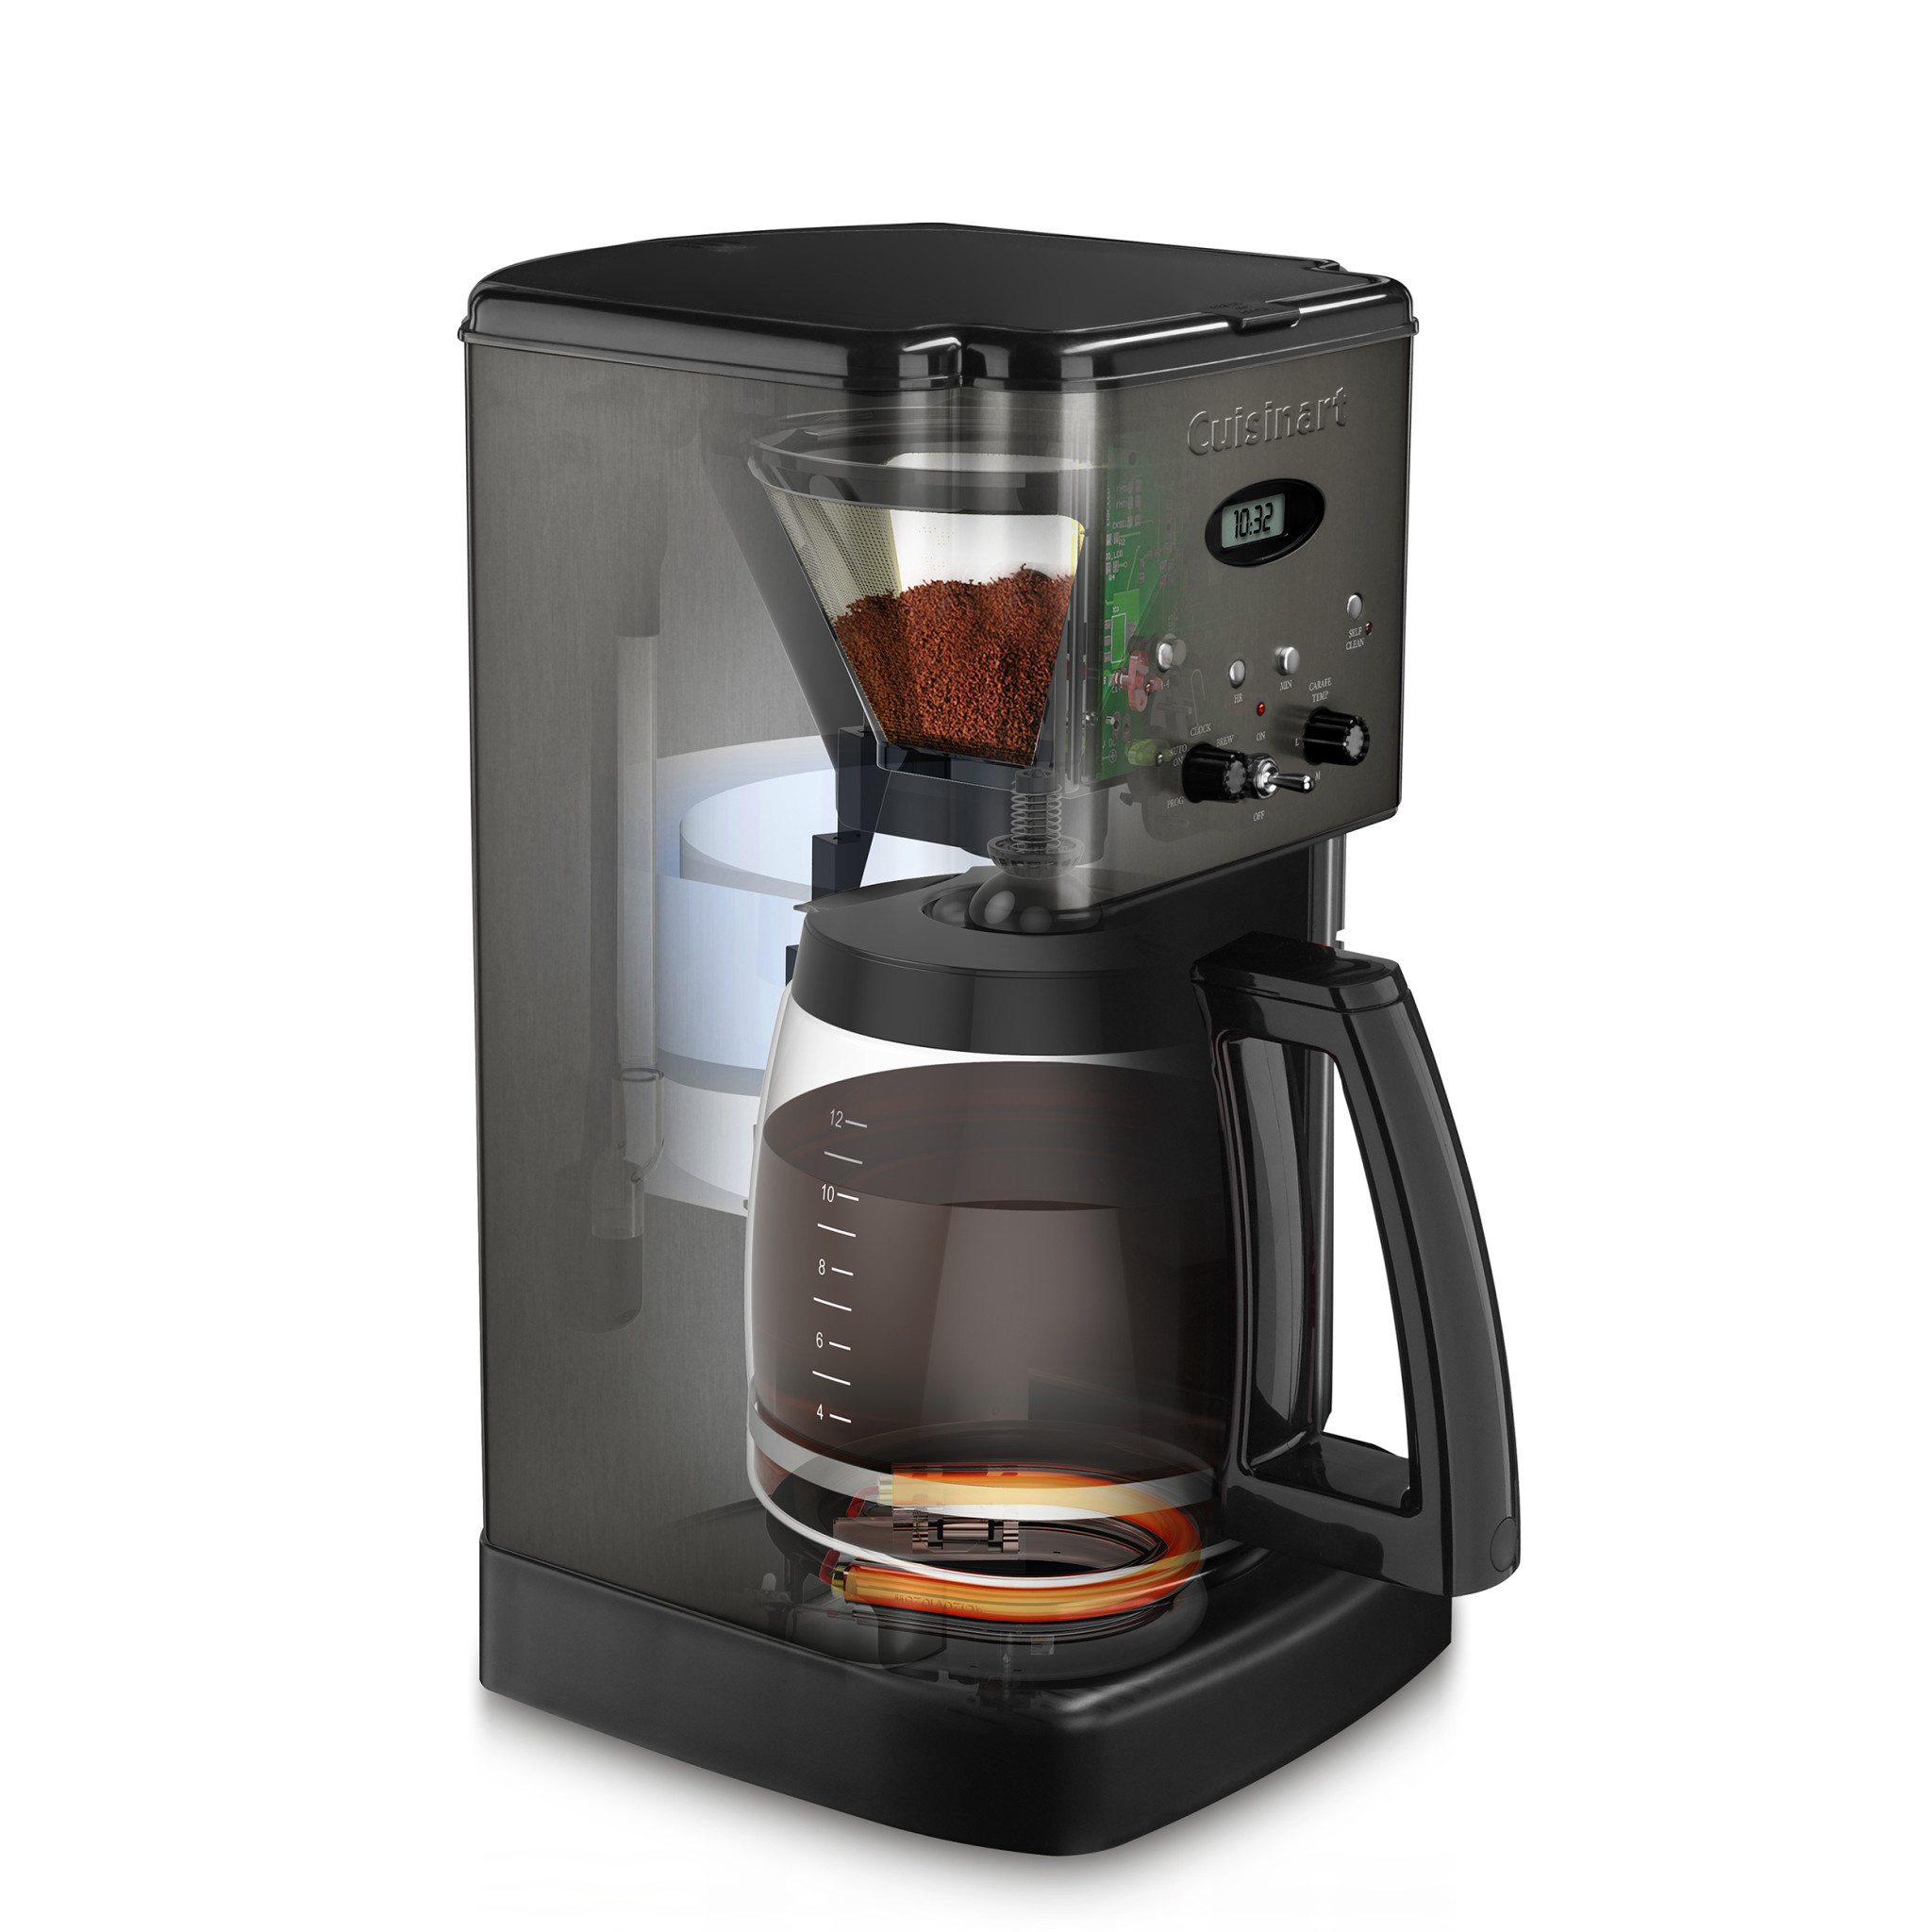 Cuisinart Brew Central 12 Cup Programmable Coffeemaker Black Stainless